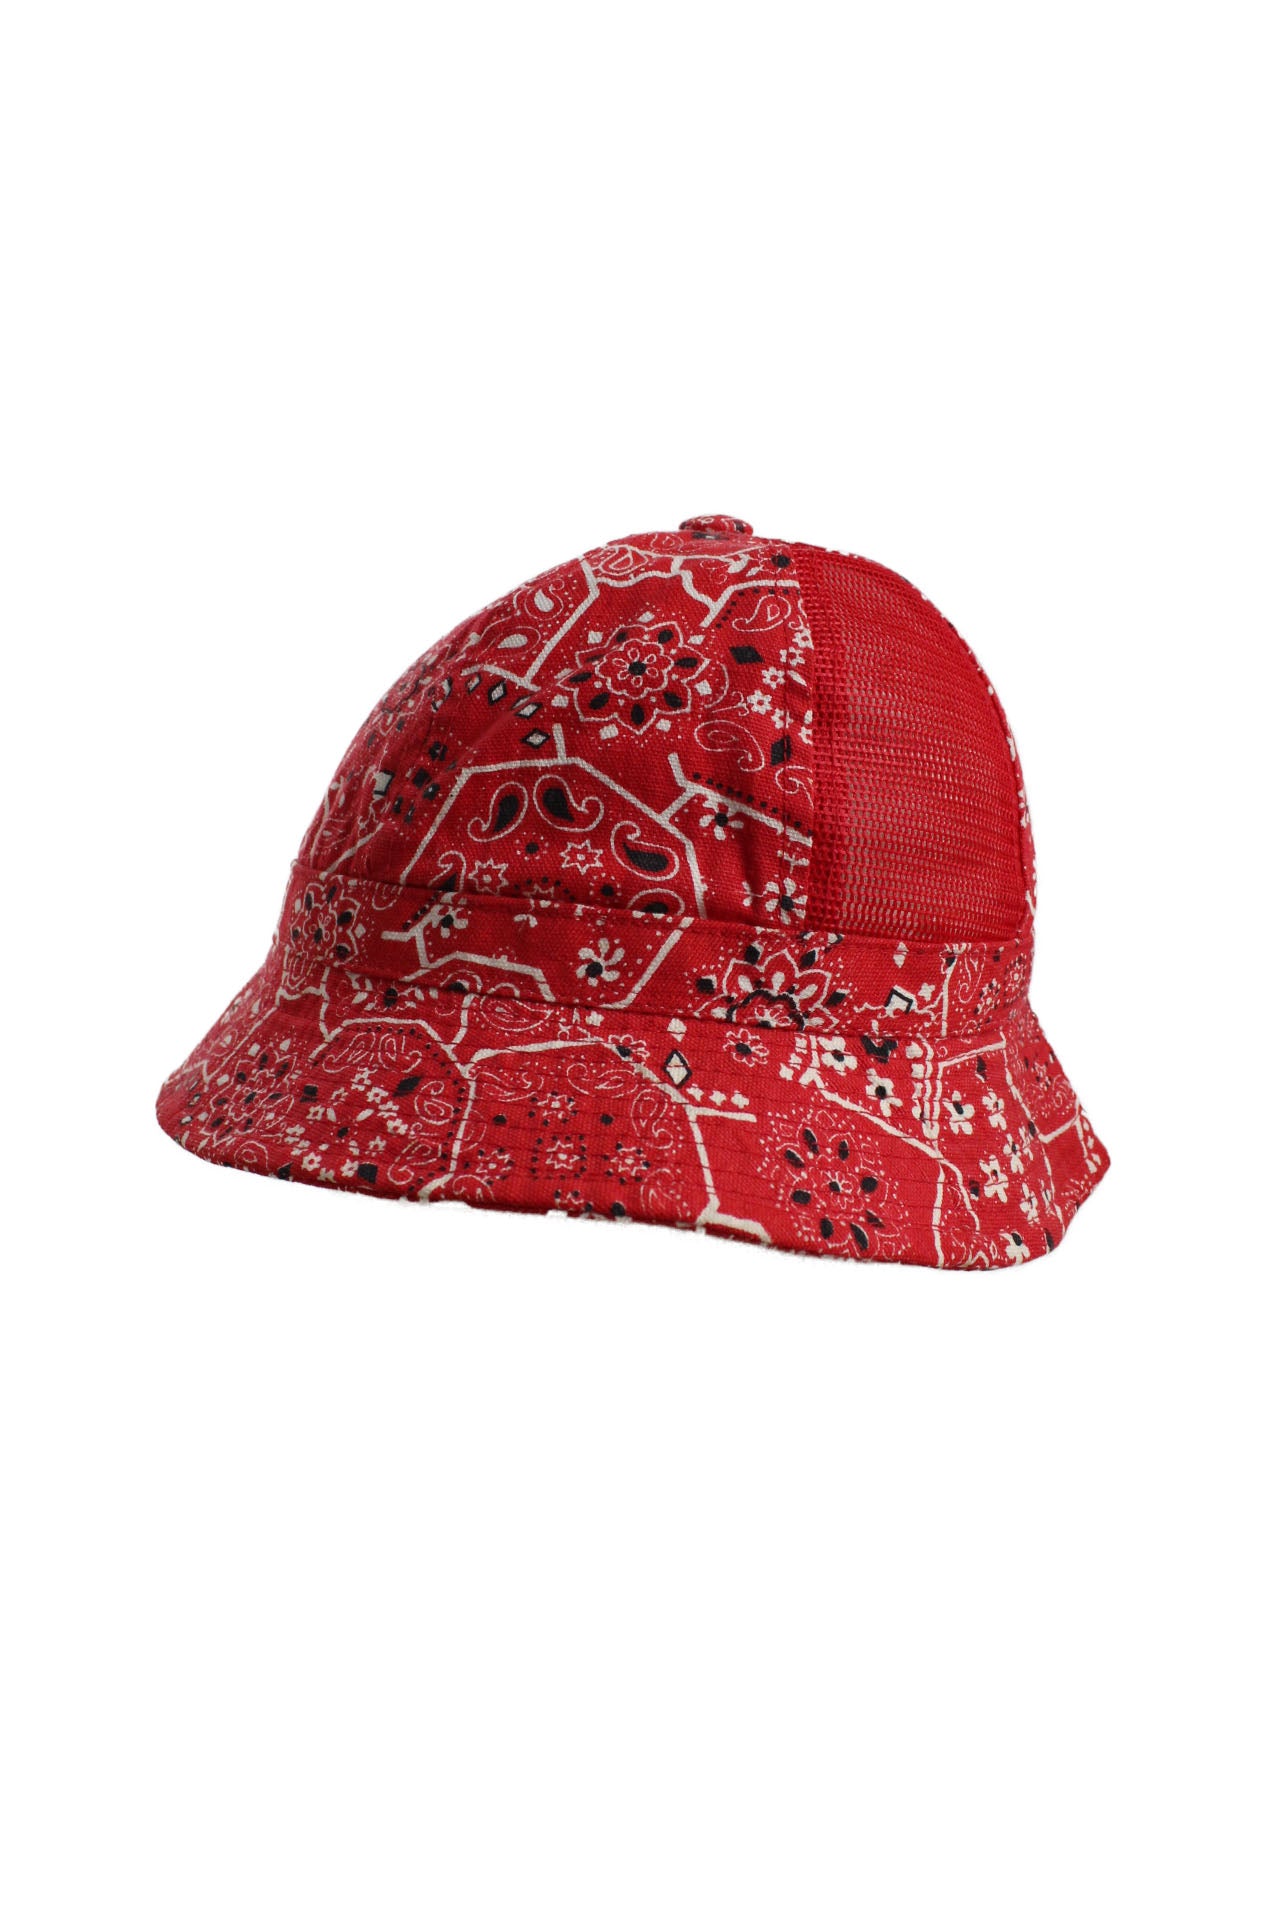 side view with mesh panel of bucket hat.